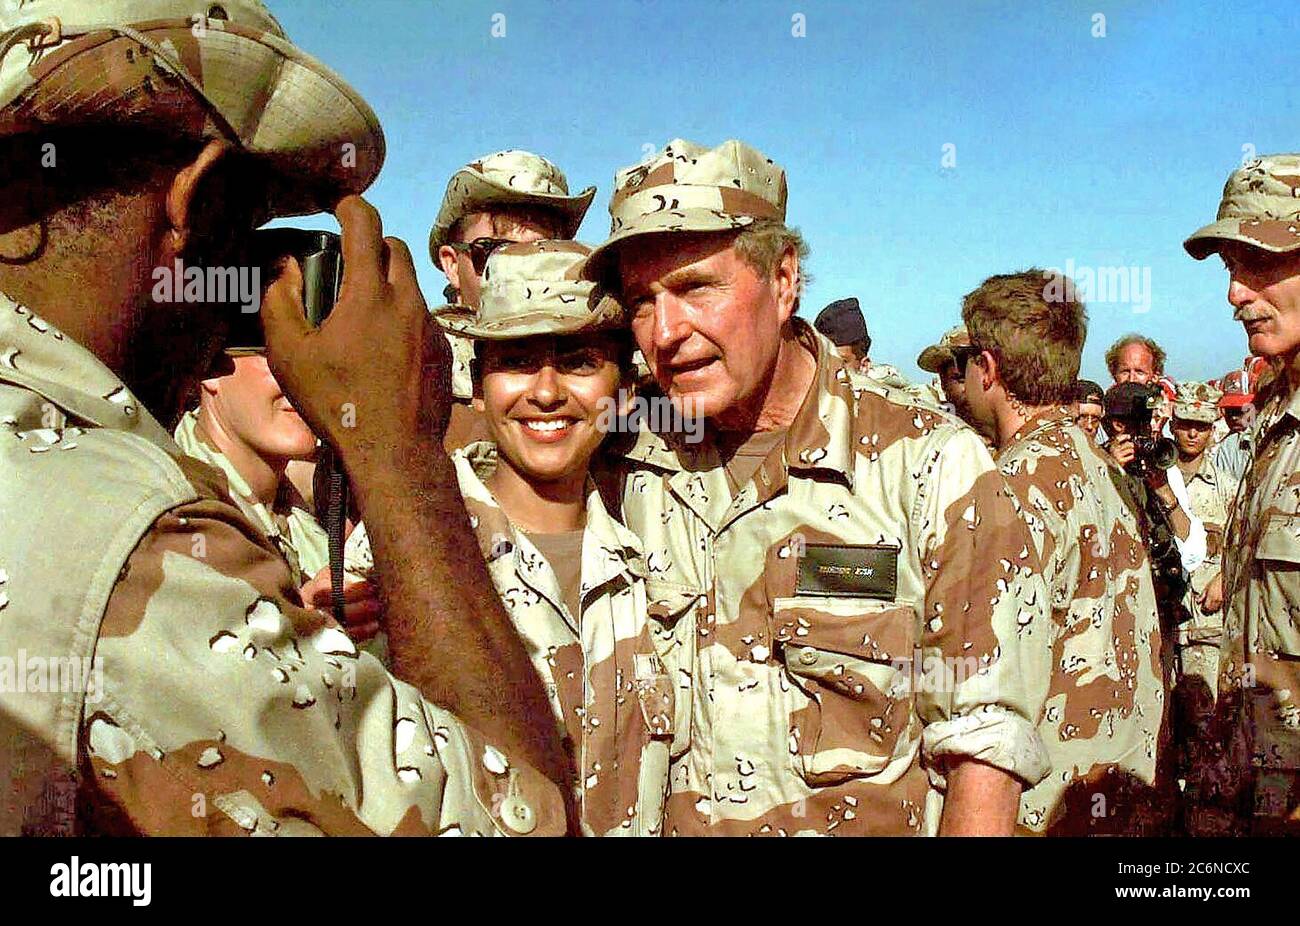 1993 - Medium close-up of US President Bush taking tome to pose for a picture with an unidentified female member of the US Forces assigned to the mission in Somalia.  A large number of other members of the force have gathered around the President.  The President visited Somalia to show is gratitude to those involved in the mission of Operation Restore Hope. Stock Photo